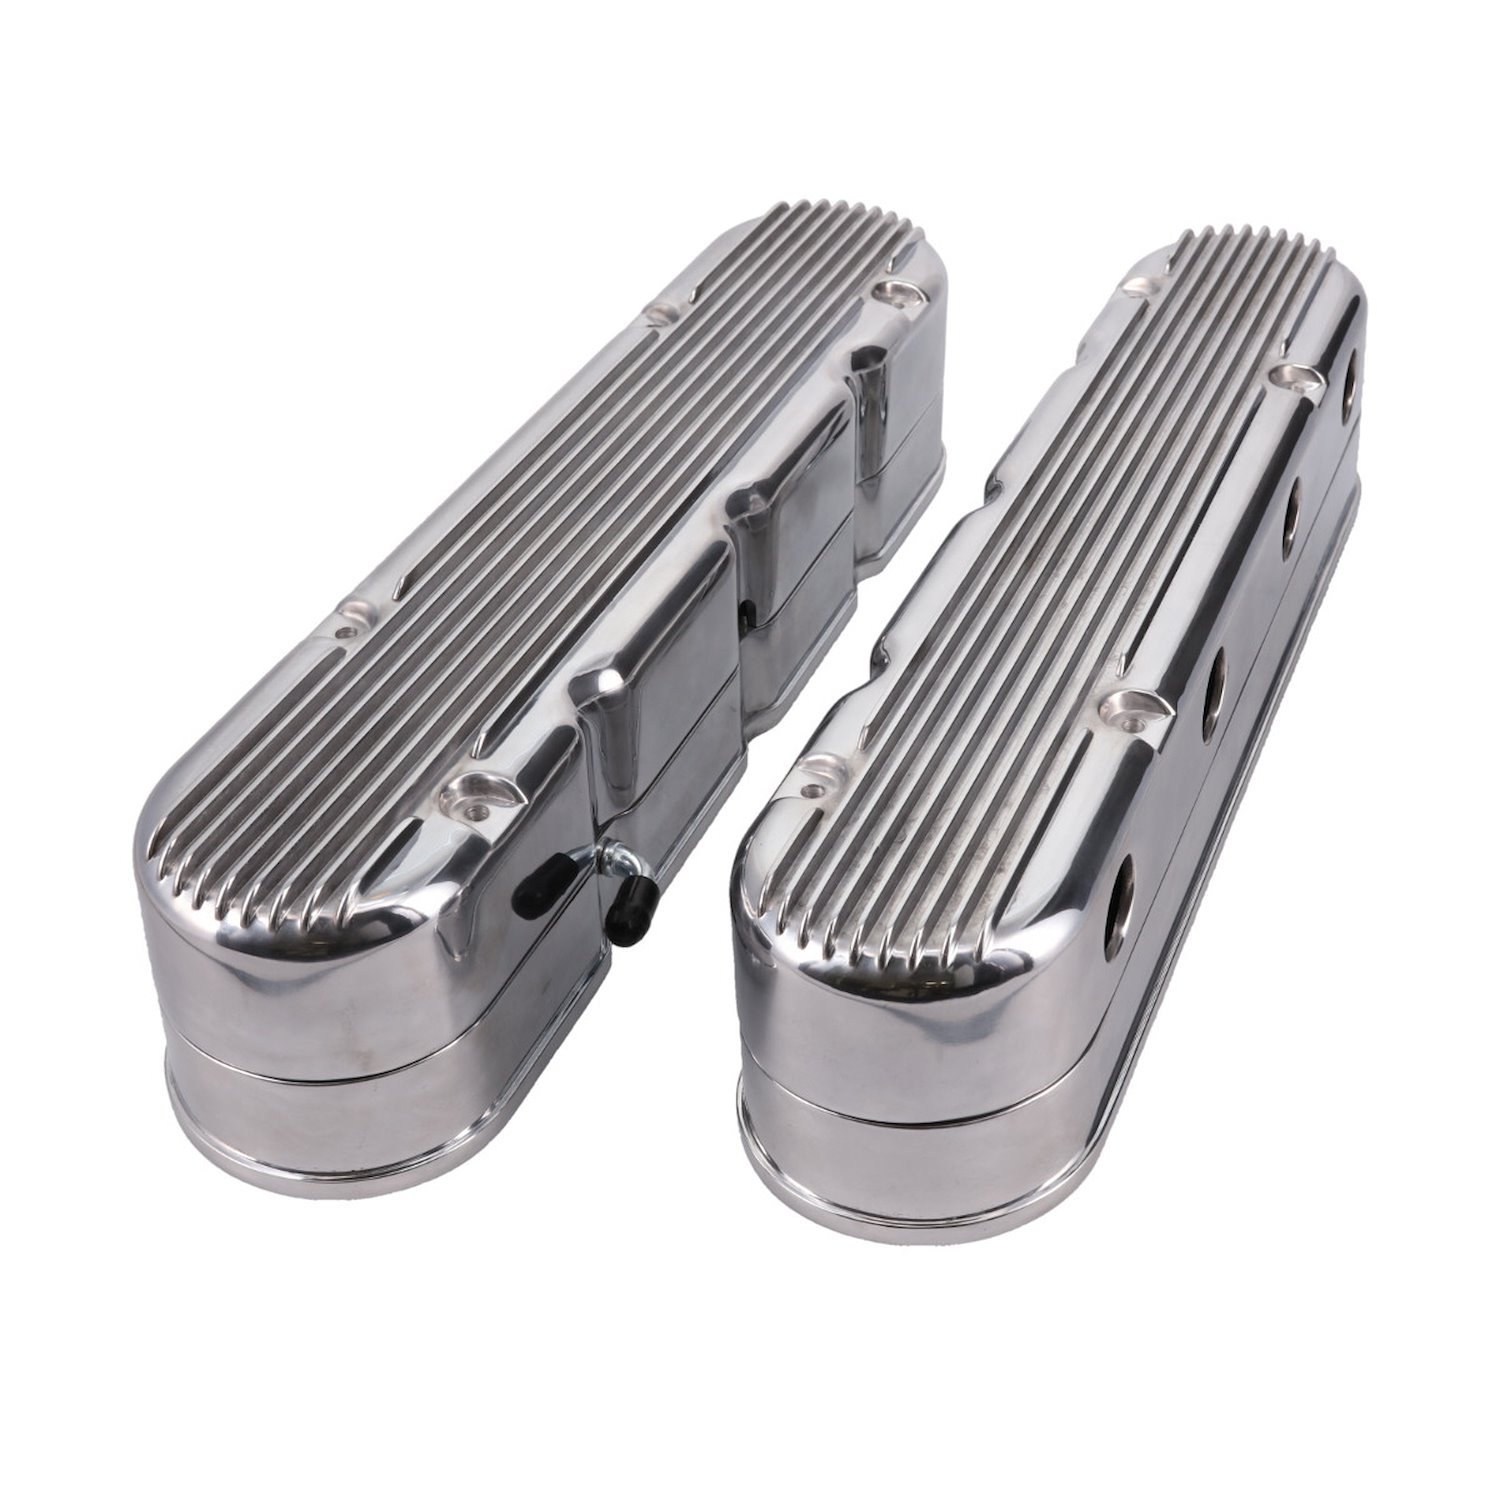 JM8082-2P Valve Covers, Finned Cast Alum., w/ Coil Covers LS, Polished